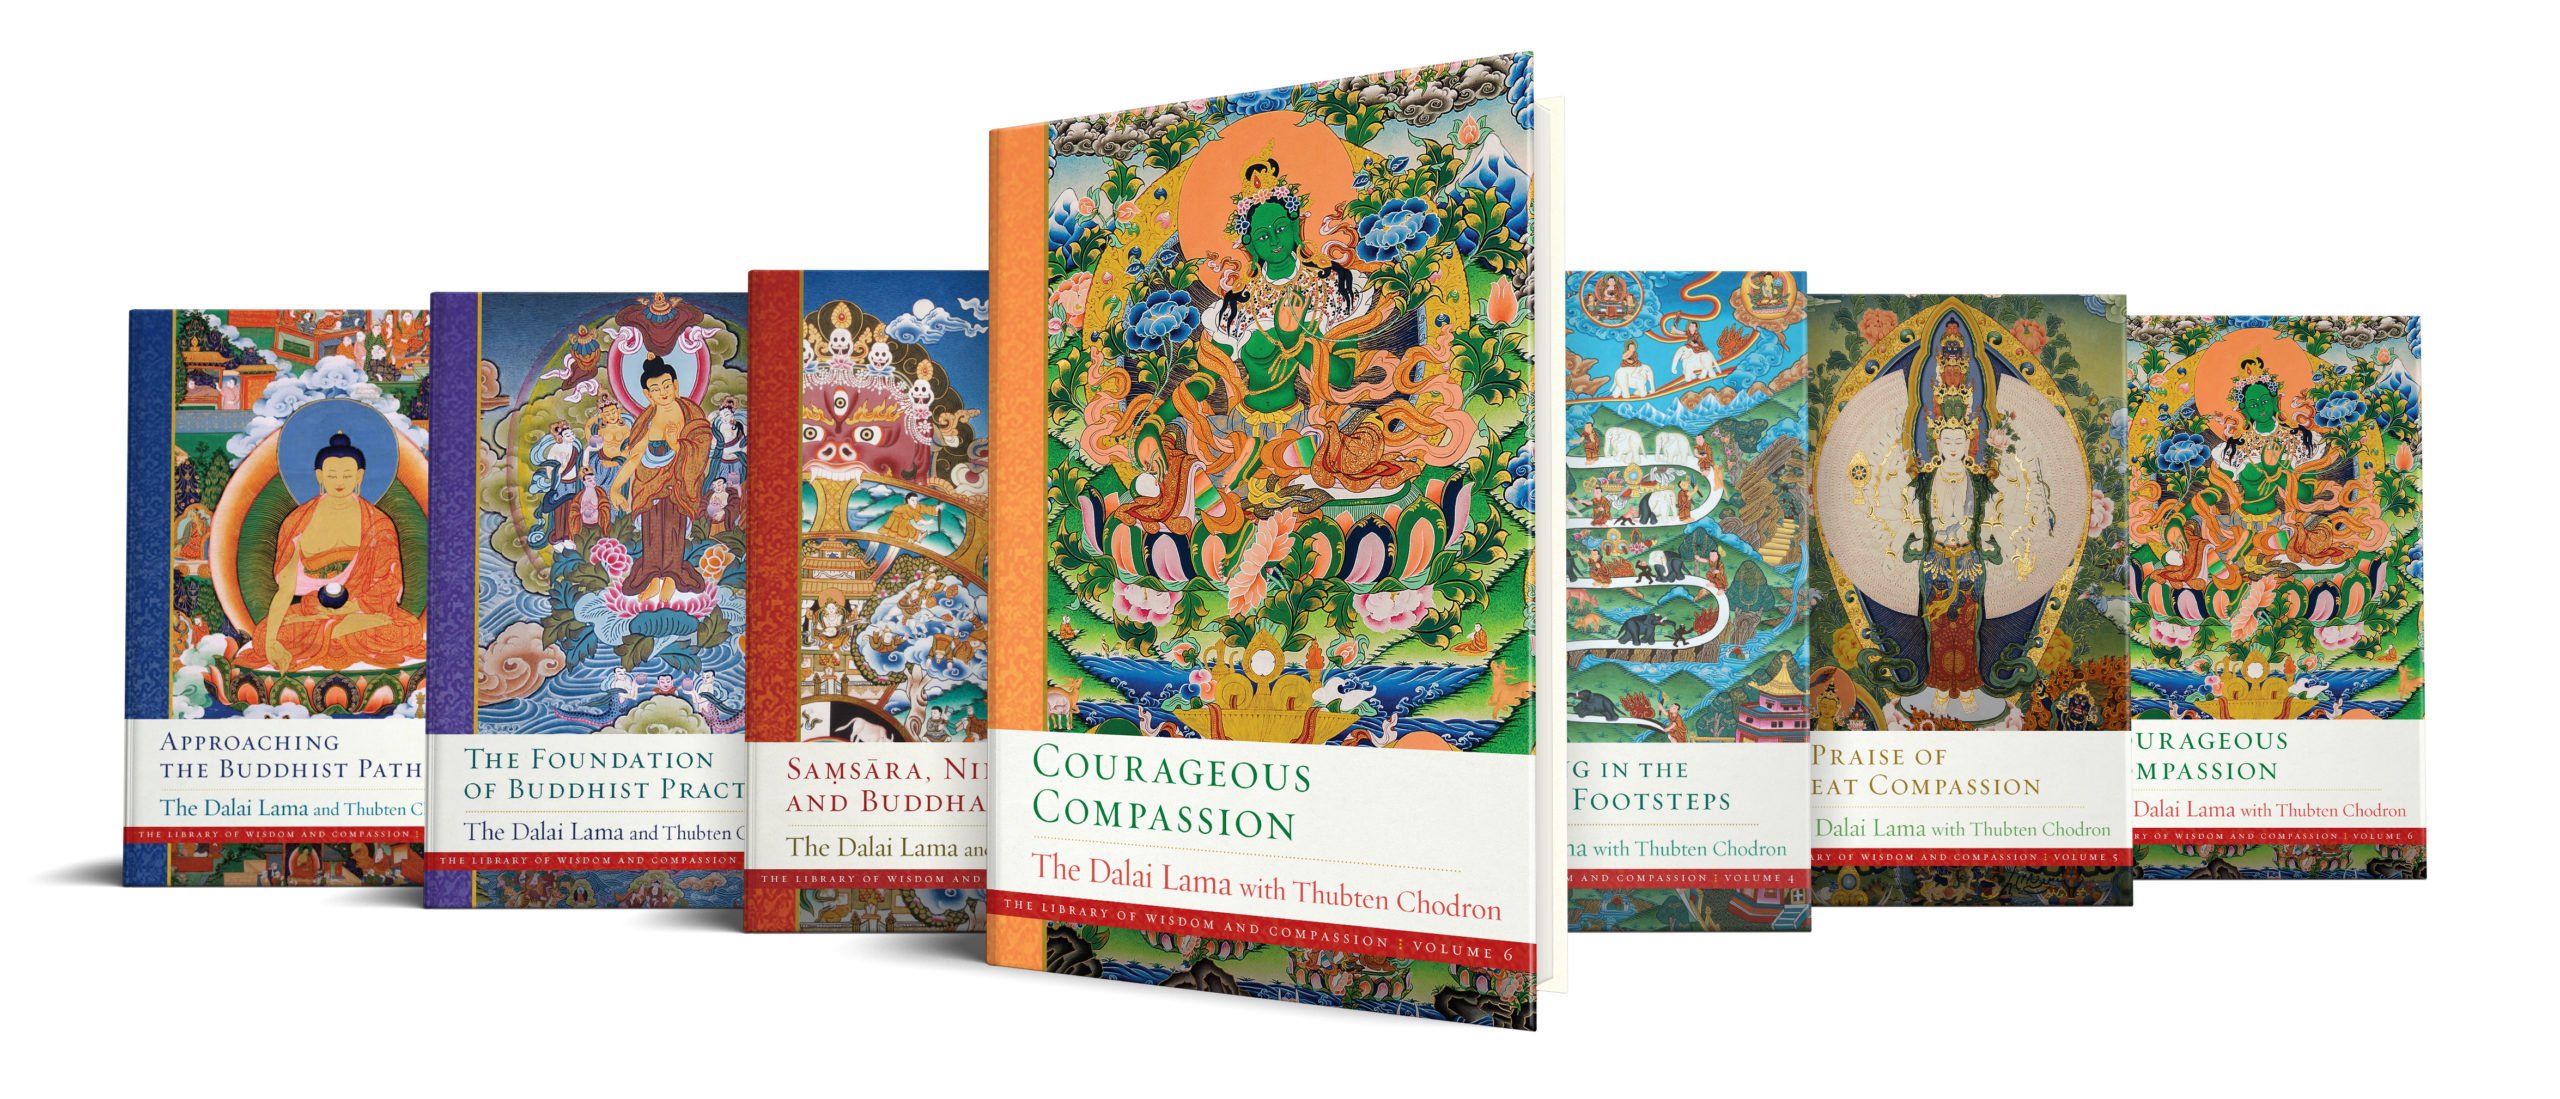 wisdom-publications-how-to-live-with-compassion-courageous-compassion-dalai-lama-article-series-image